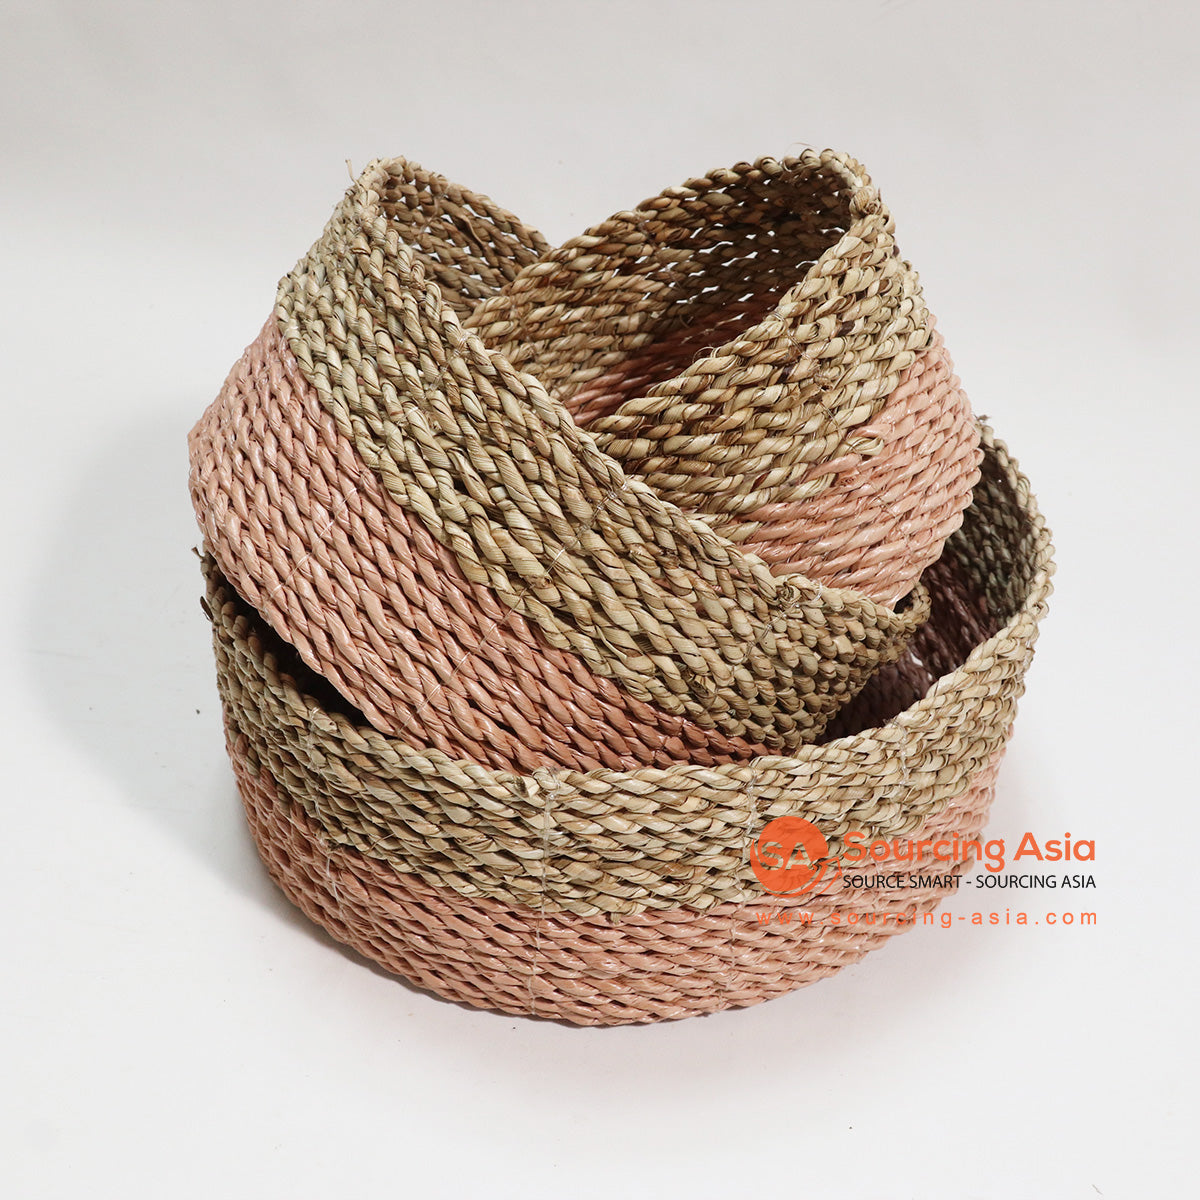 HBSC051-2 SET OF THREE NATURAL AND PINK ROUND BASKETS